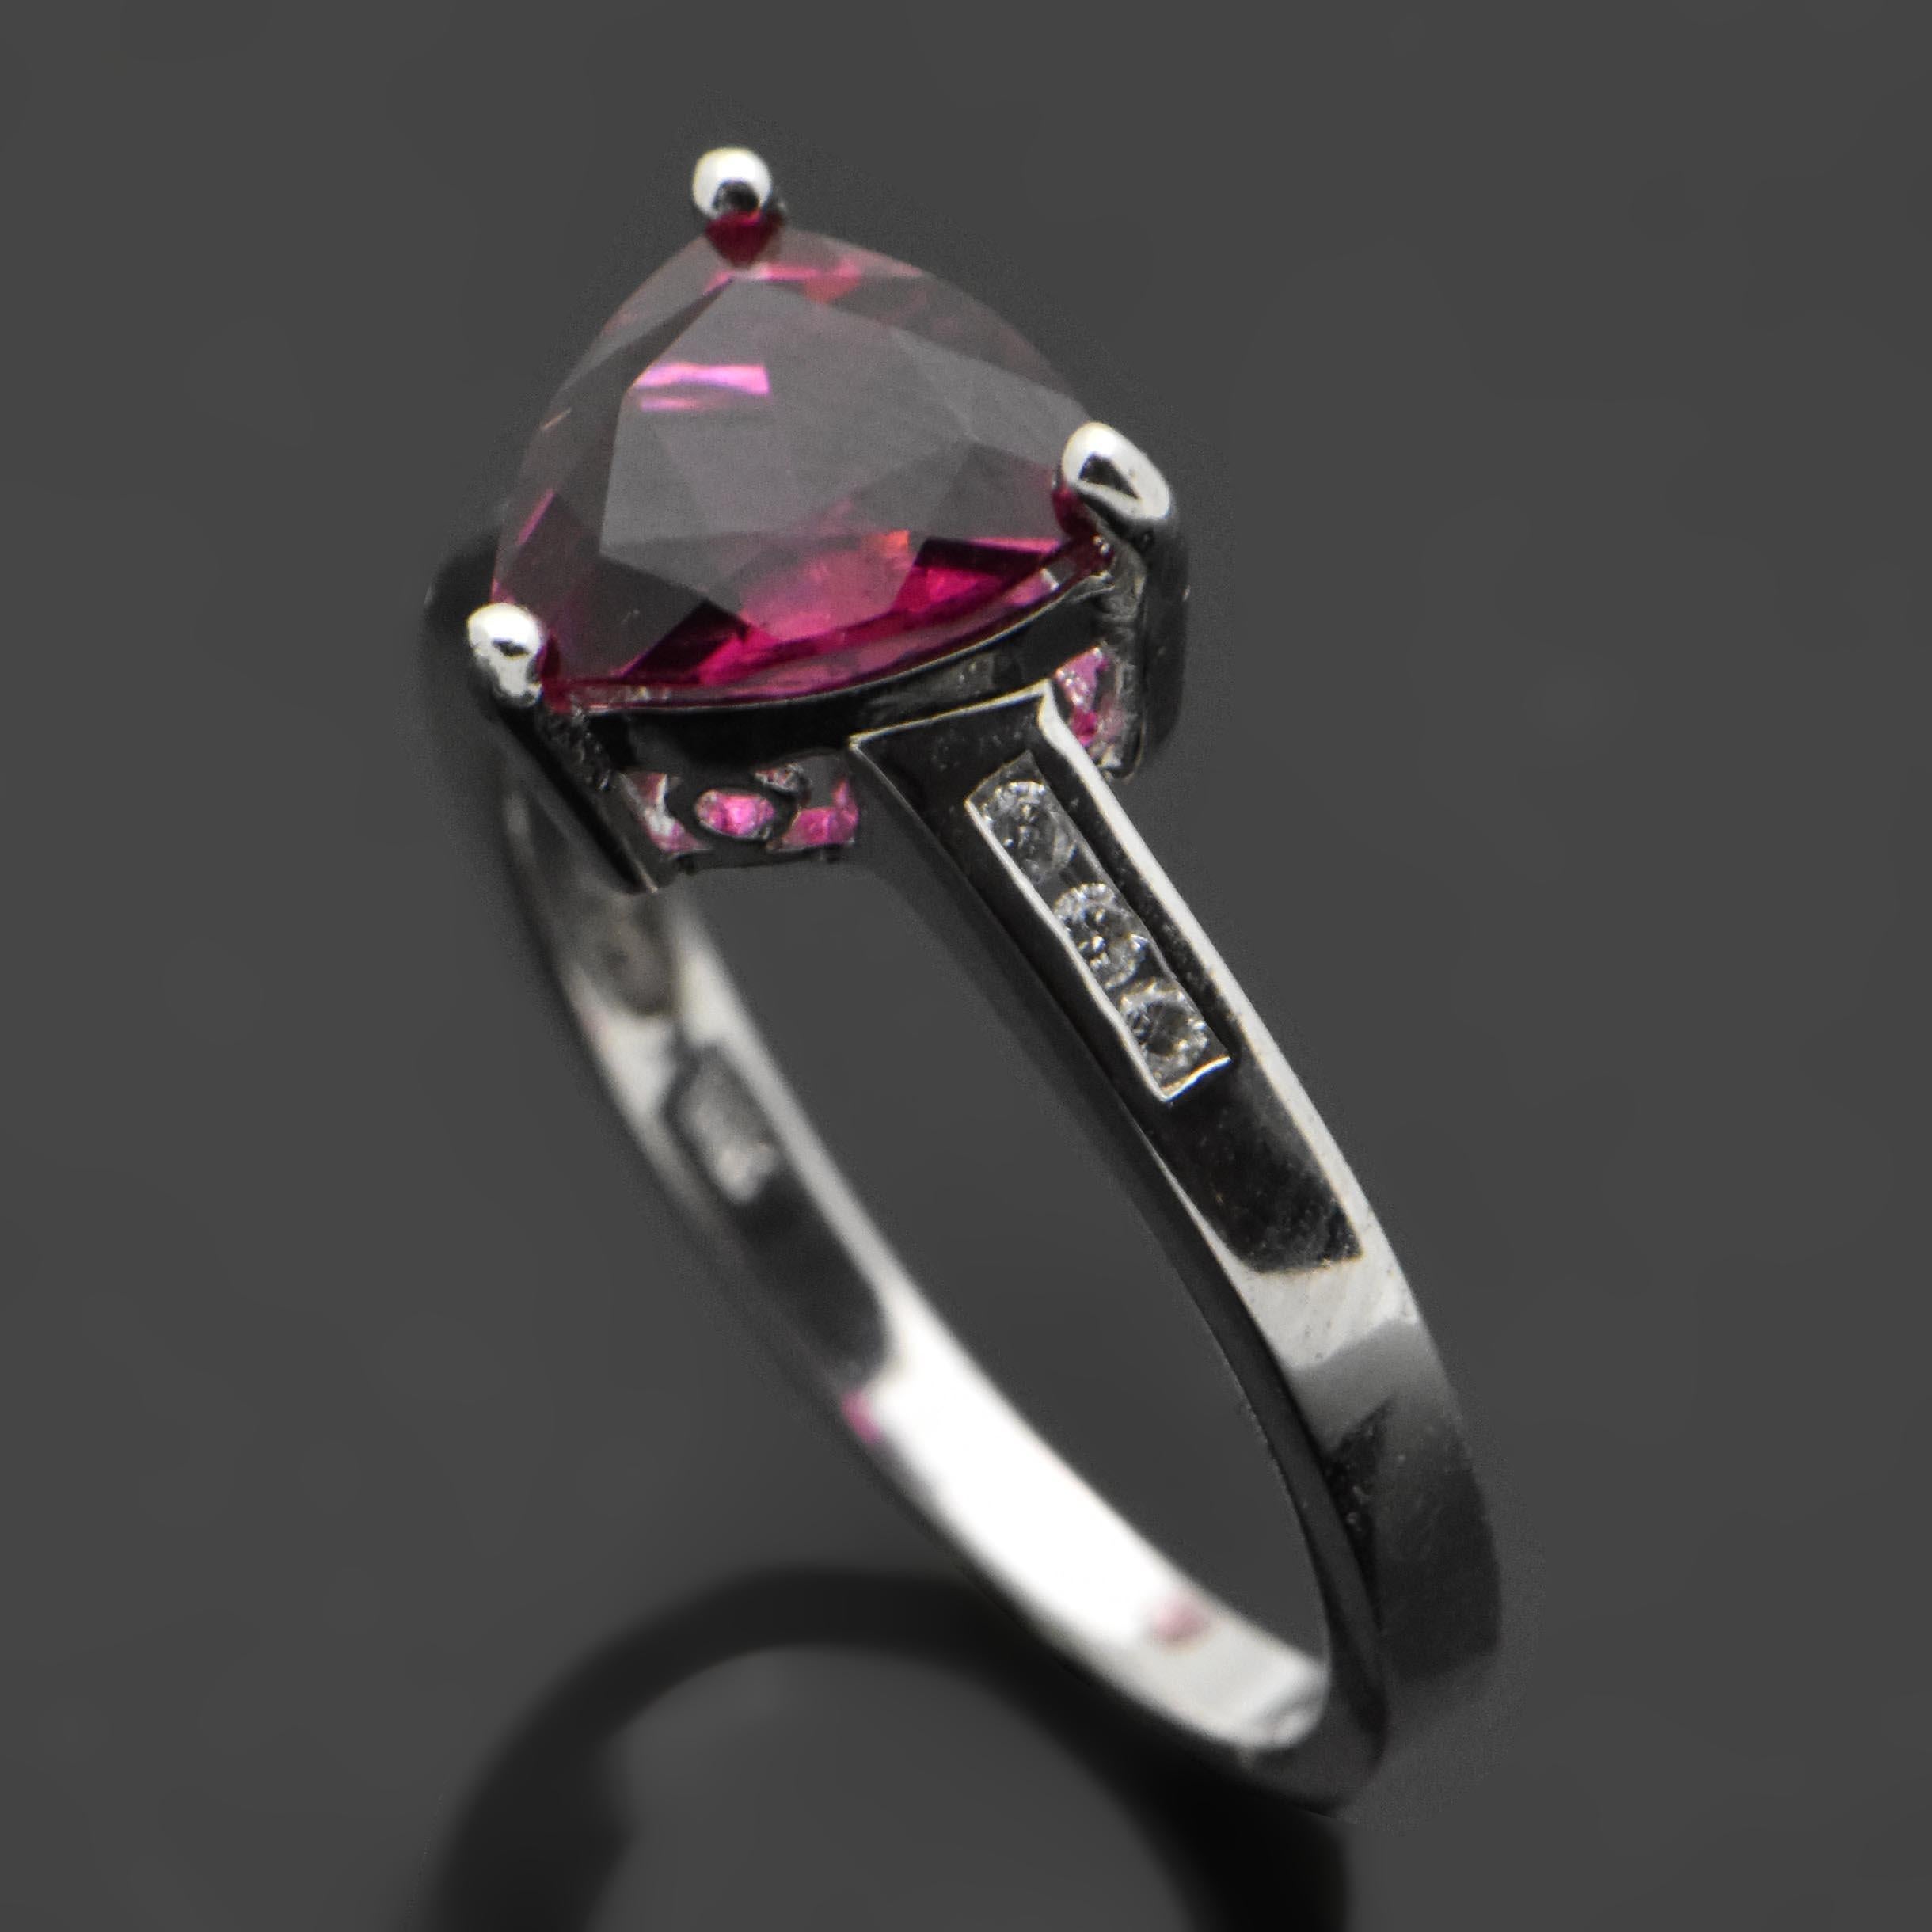 A vintage 14kt white gold ring set with a triangle-cut tourmaline at an estimated weight of 1.46 ct. and six diamonds with a 0.05 cttw. Estimated weight of gold is 2 gr. 

We will size it for you.

